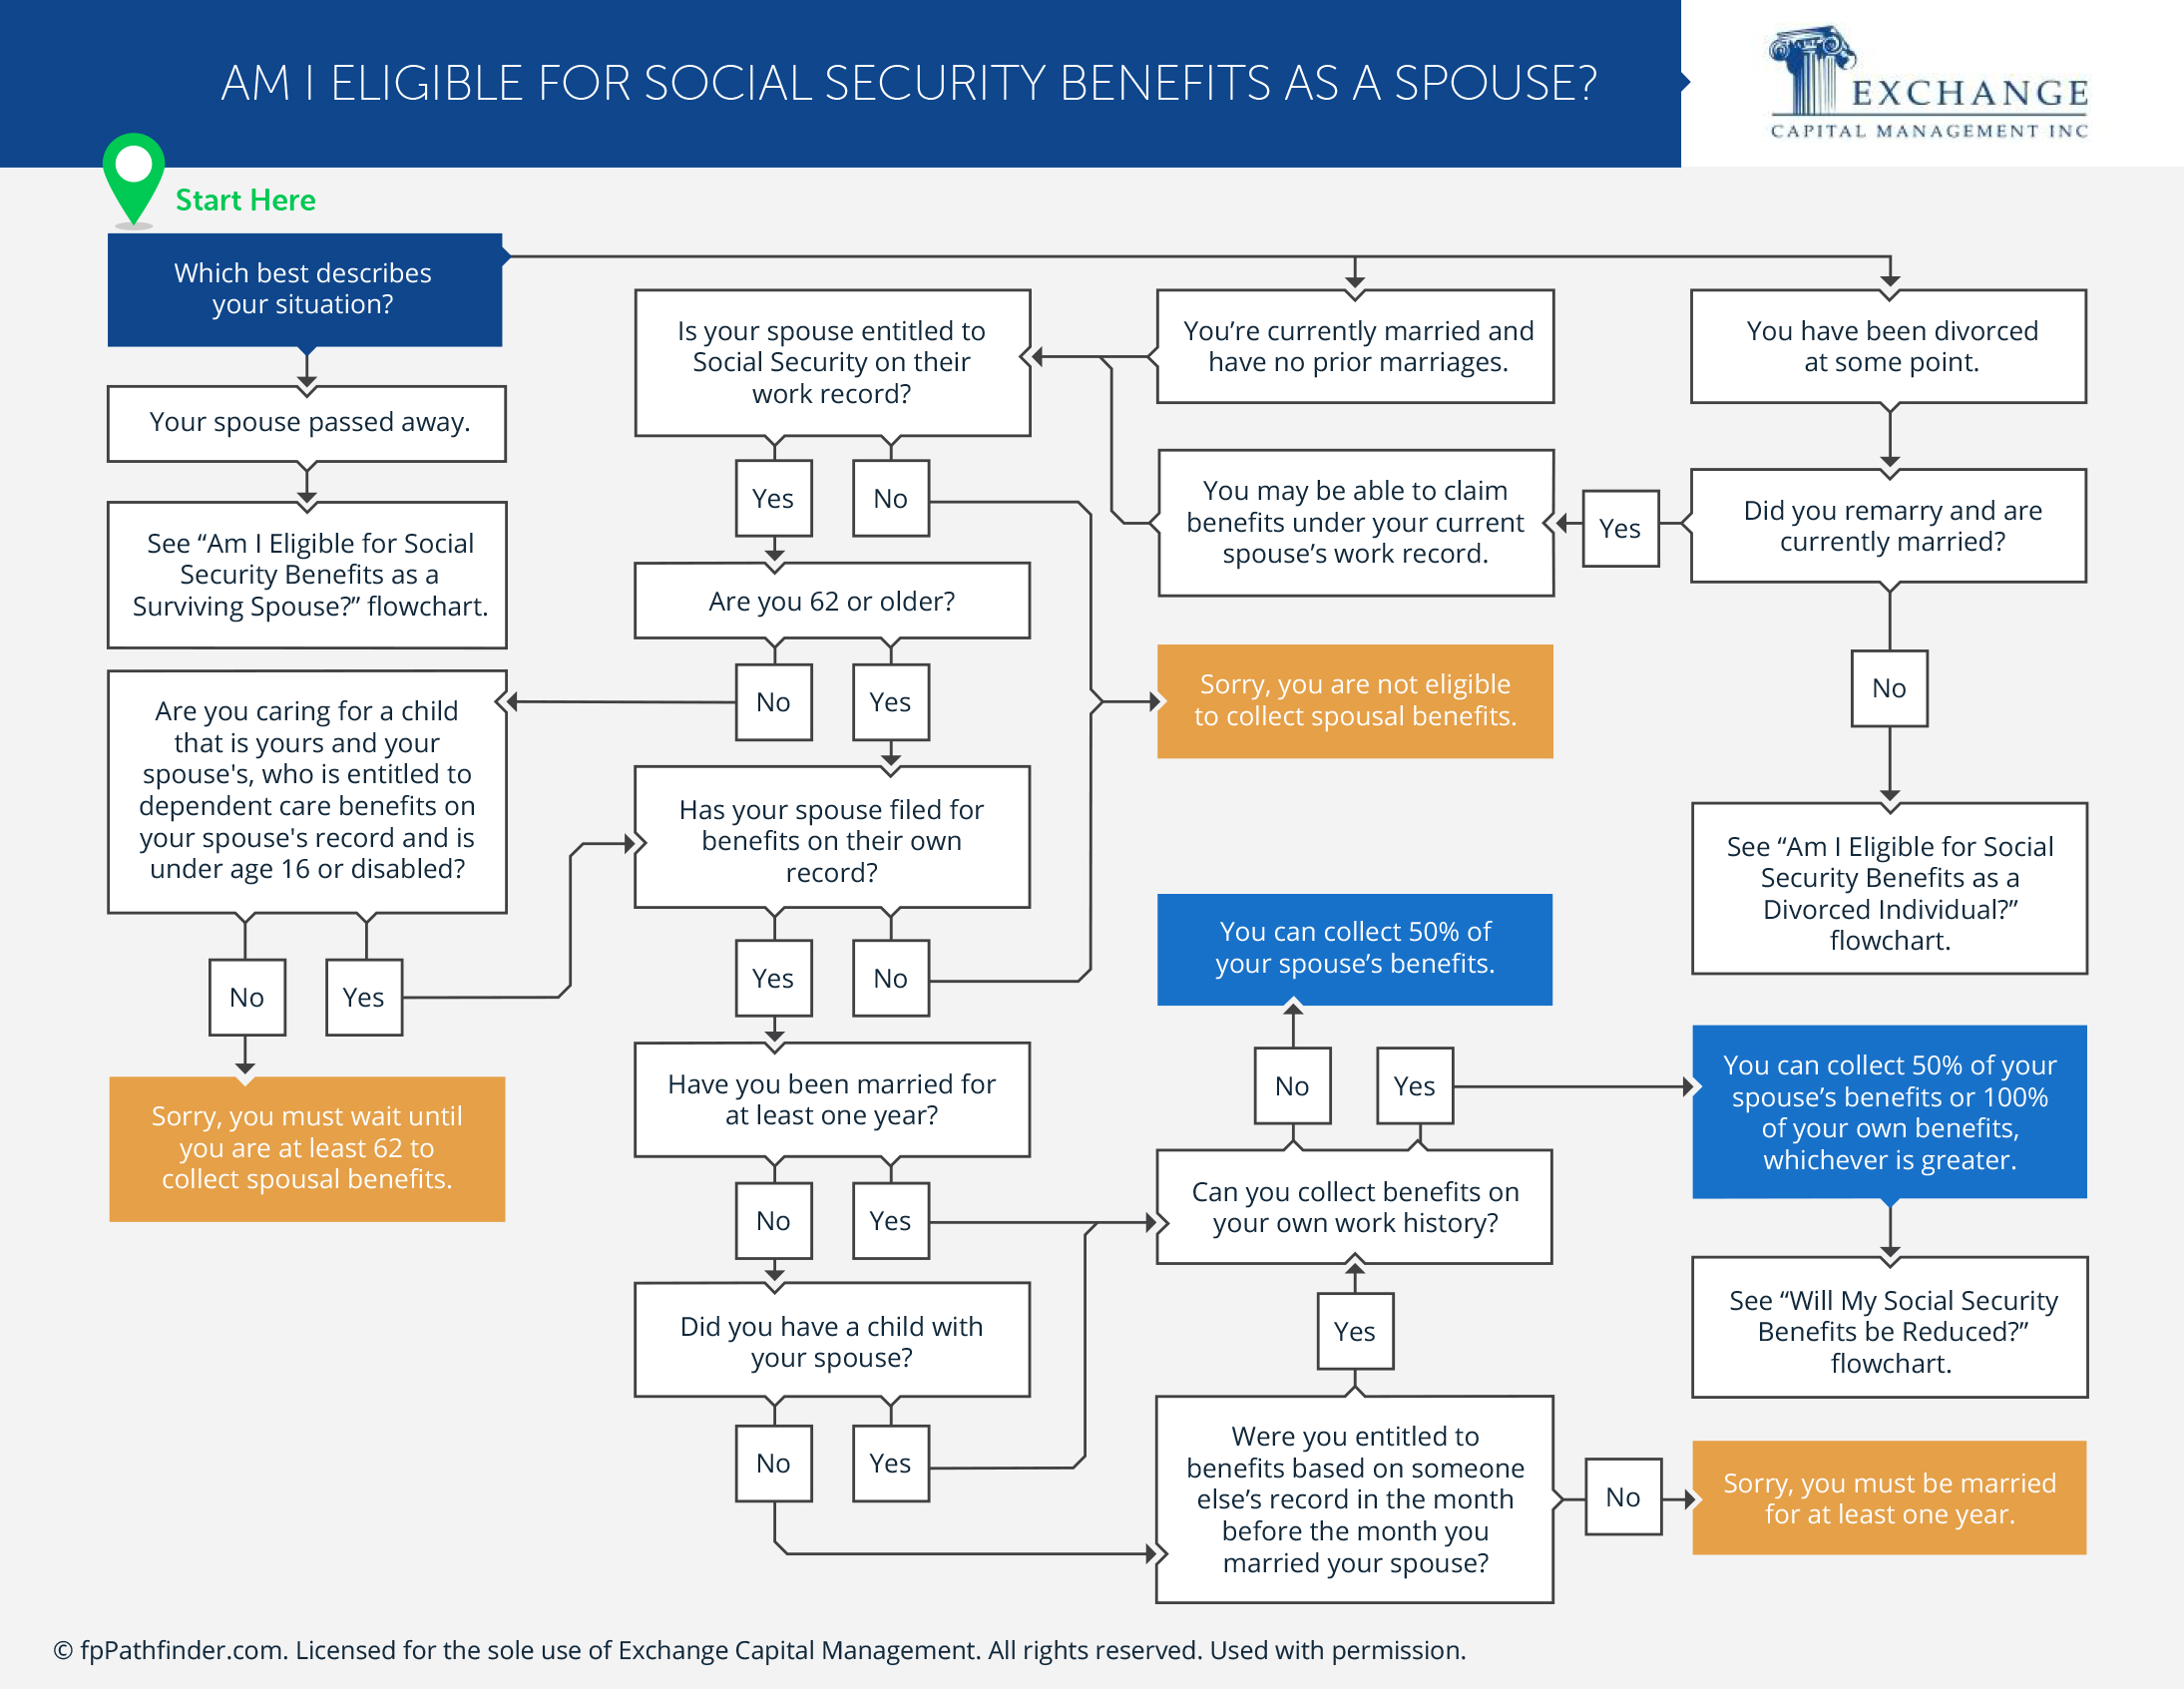 Am I Eligible for Social Security Benefits as a Spouse?